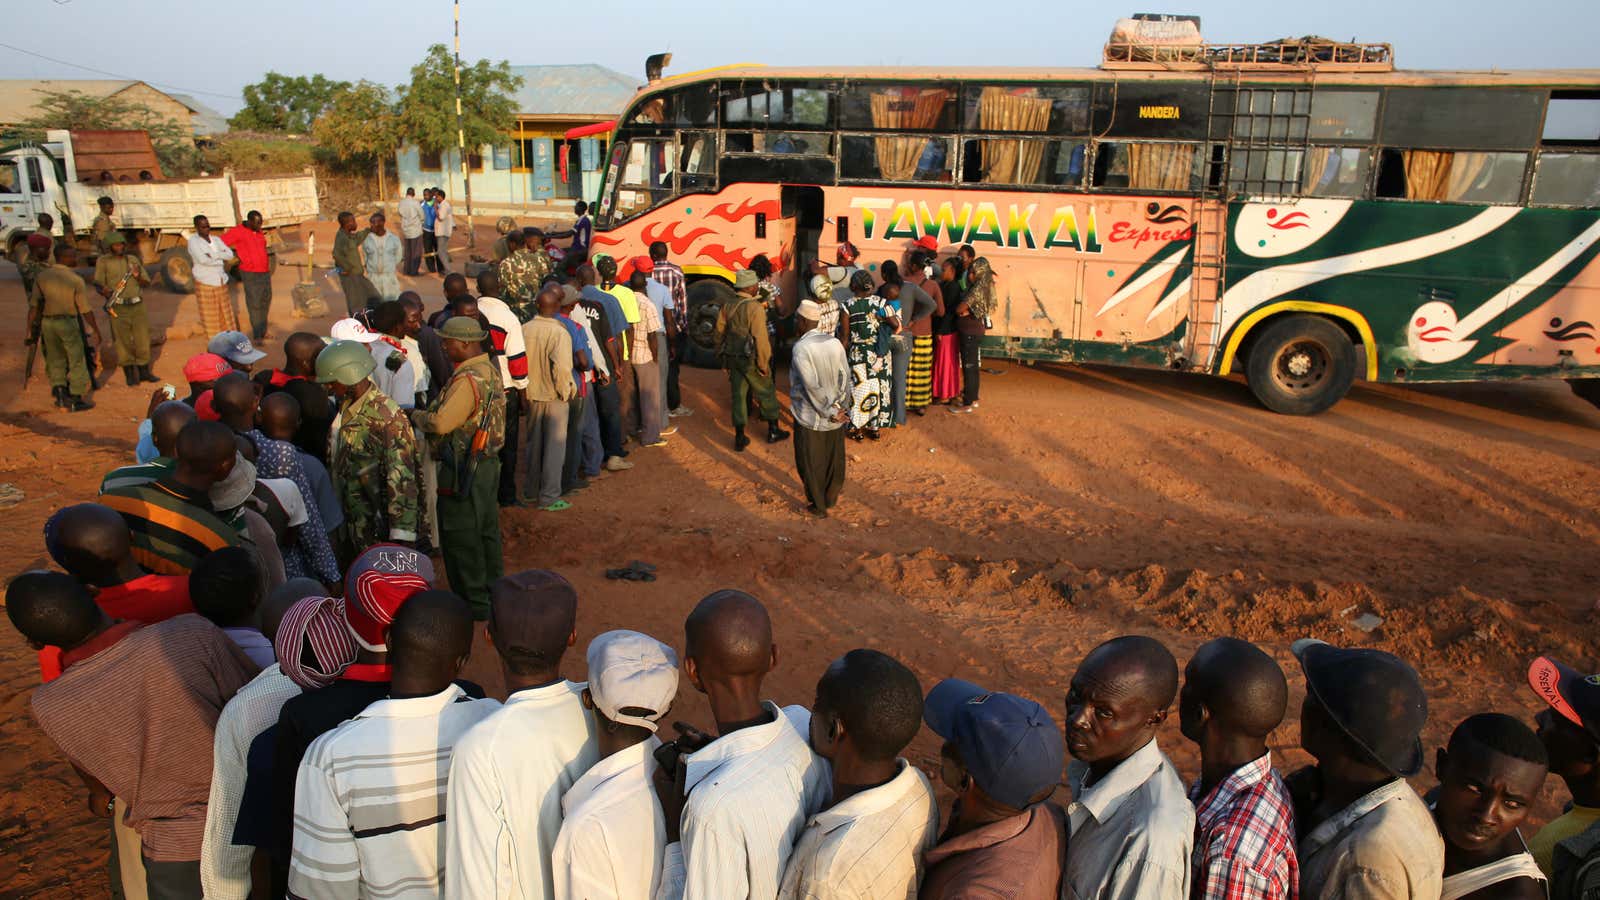 Passengers in Mandera, boarding a bus to Nairobi. Al-Shabab militants have staged several attacks in the area.